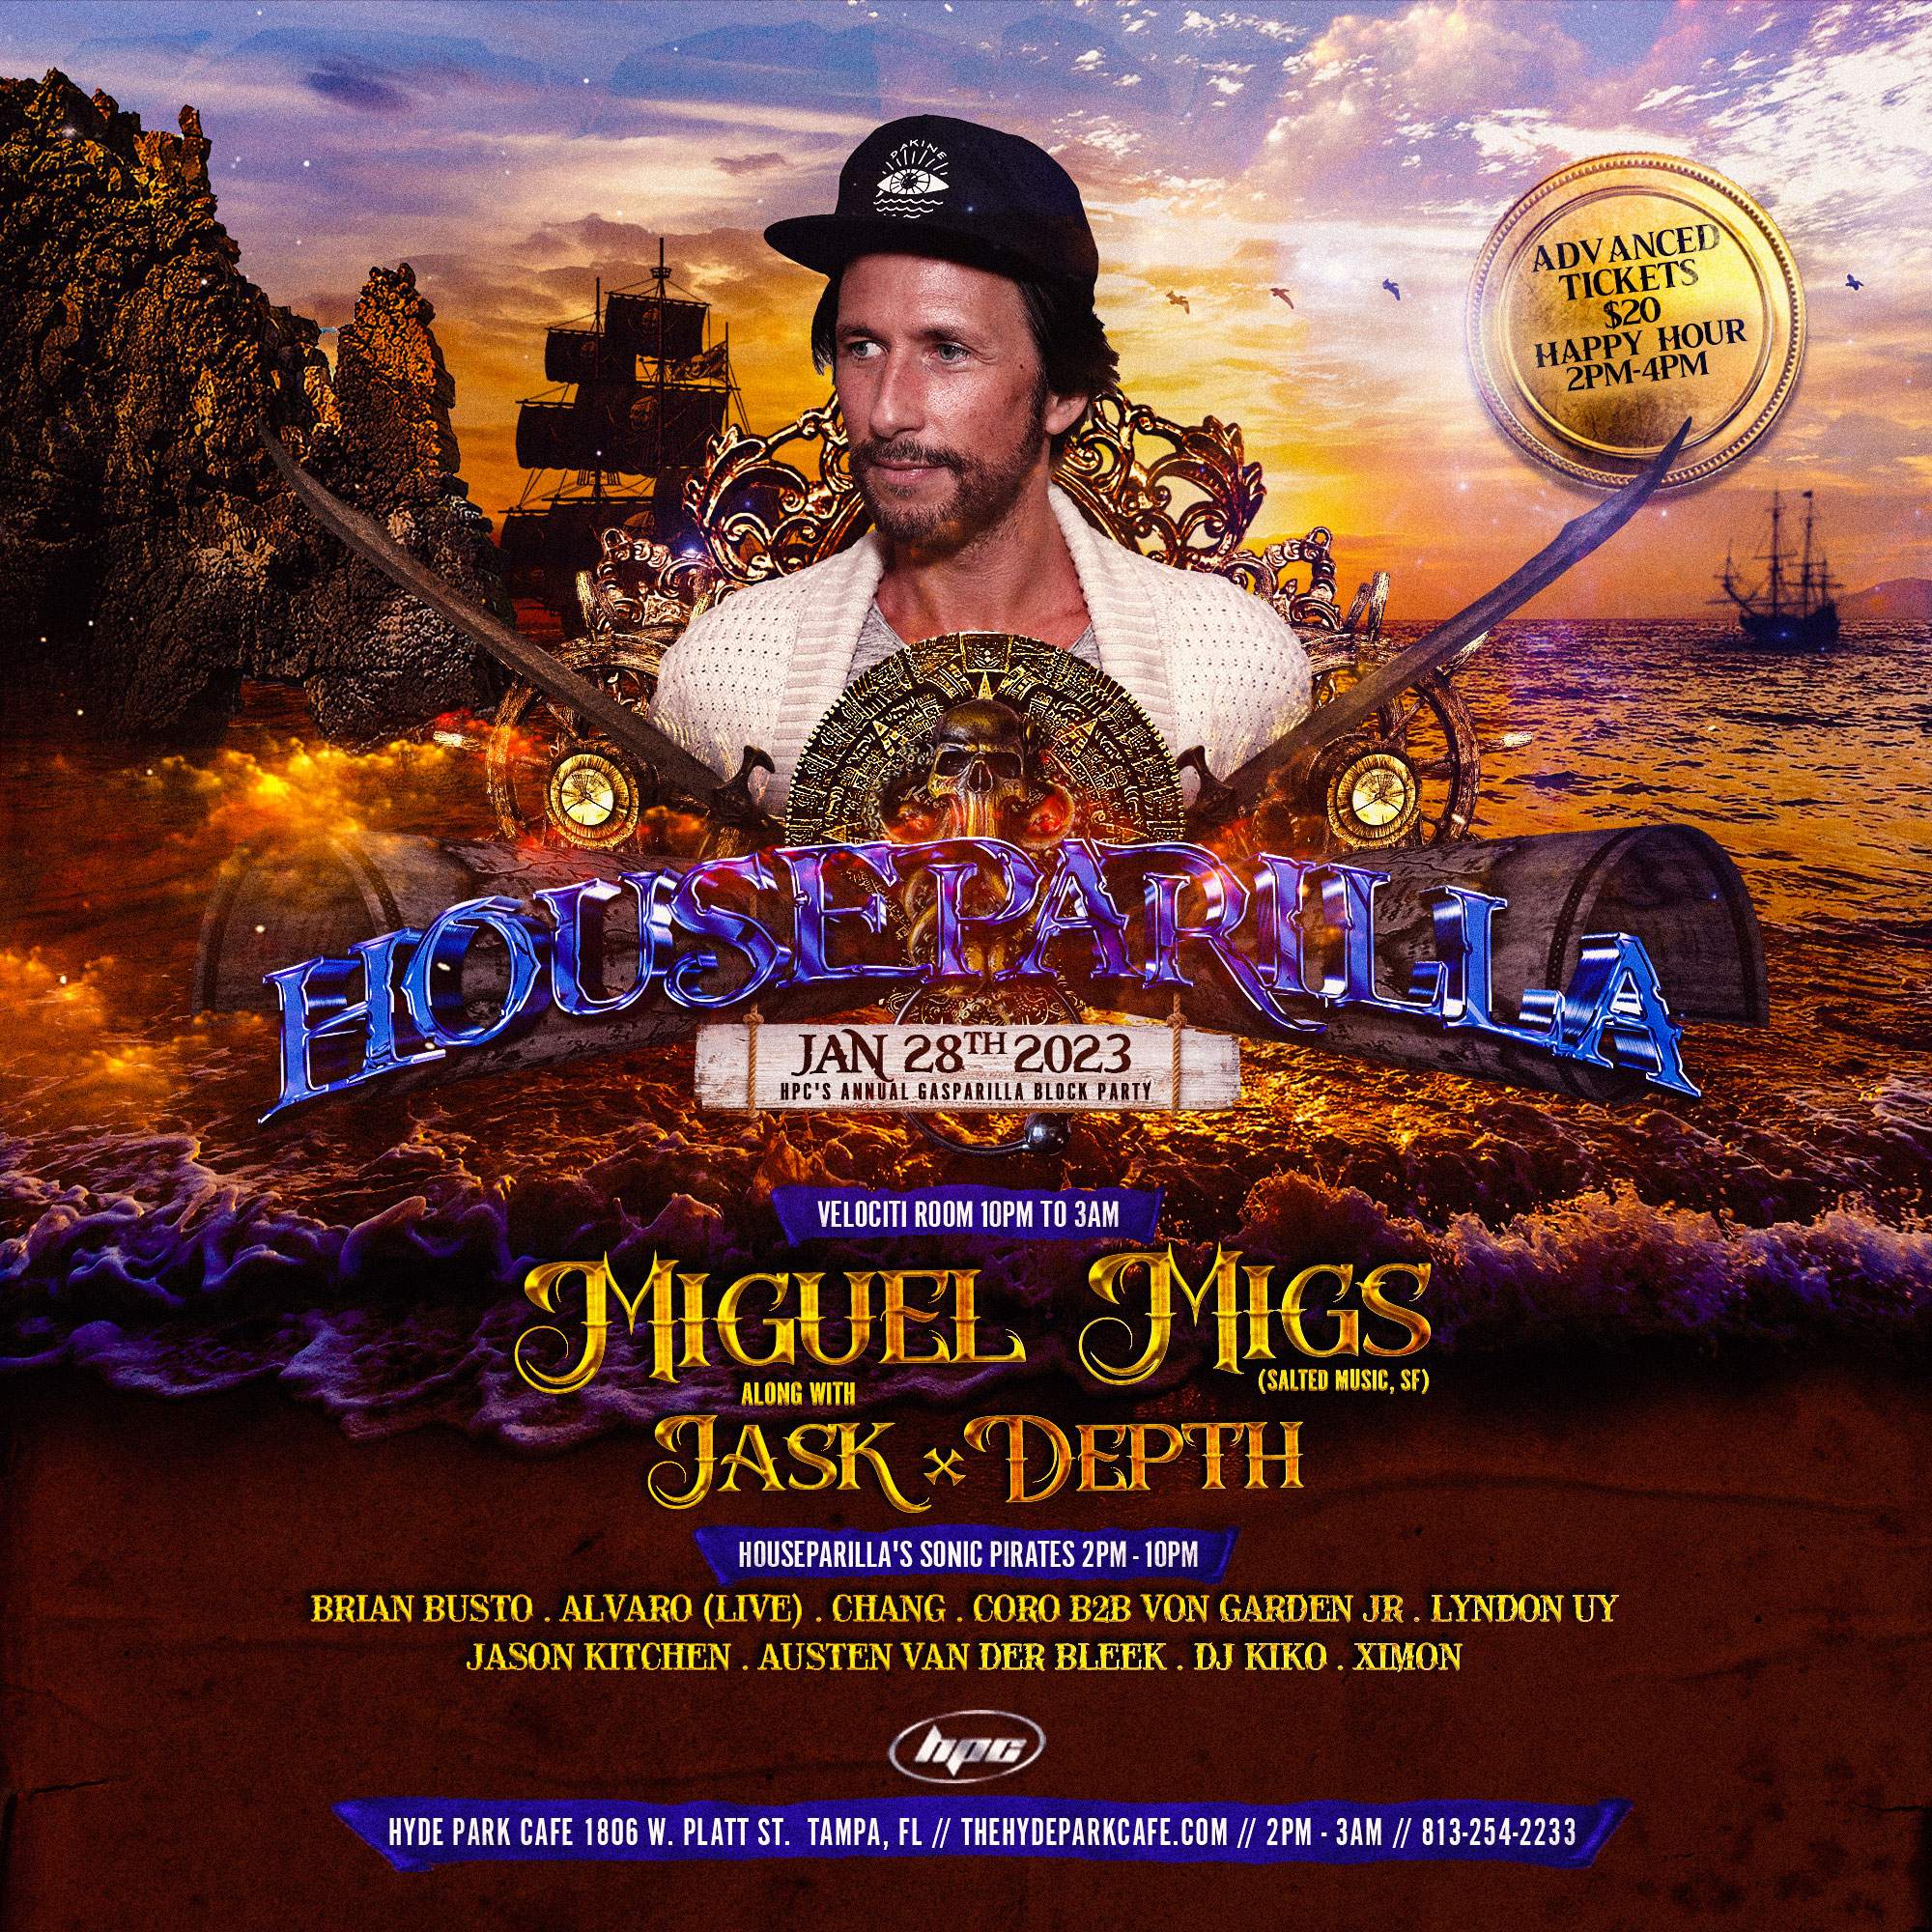 Houseparilla feat. Miguel Migs, Jask, Brian Busto, & More - フライヤー表